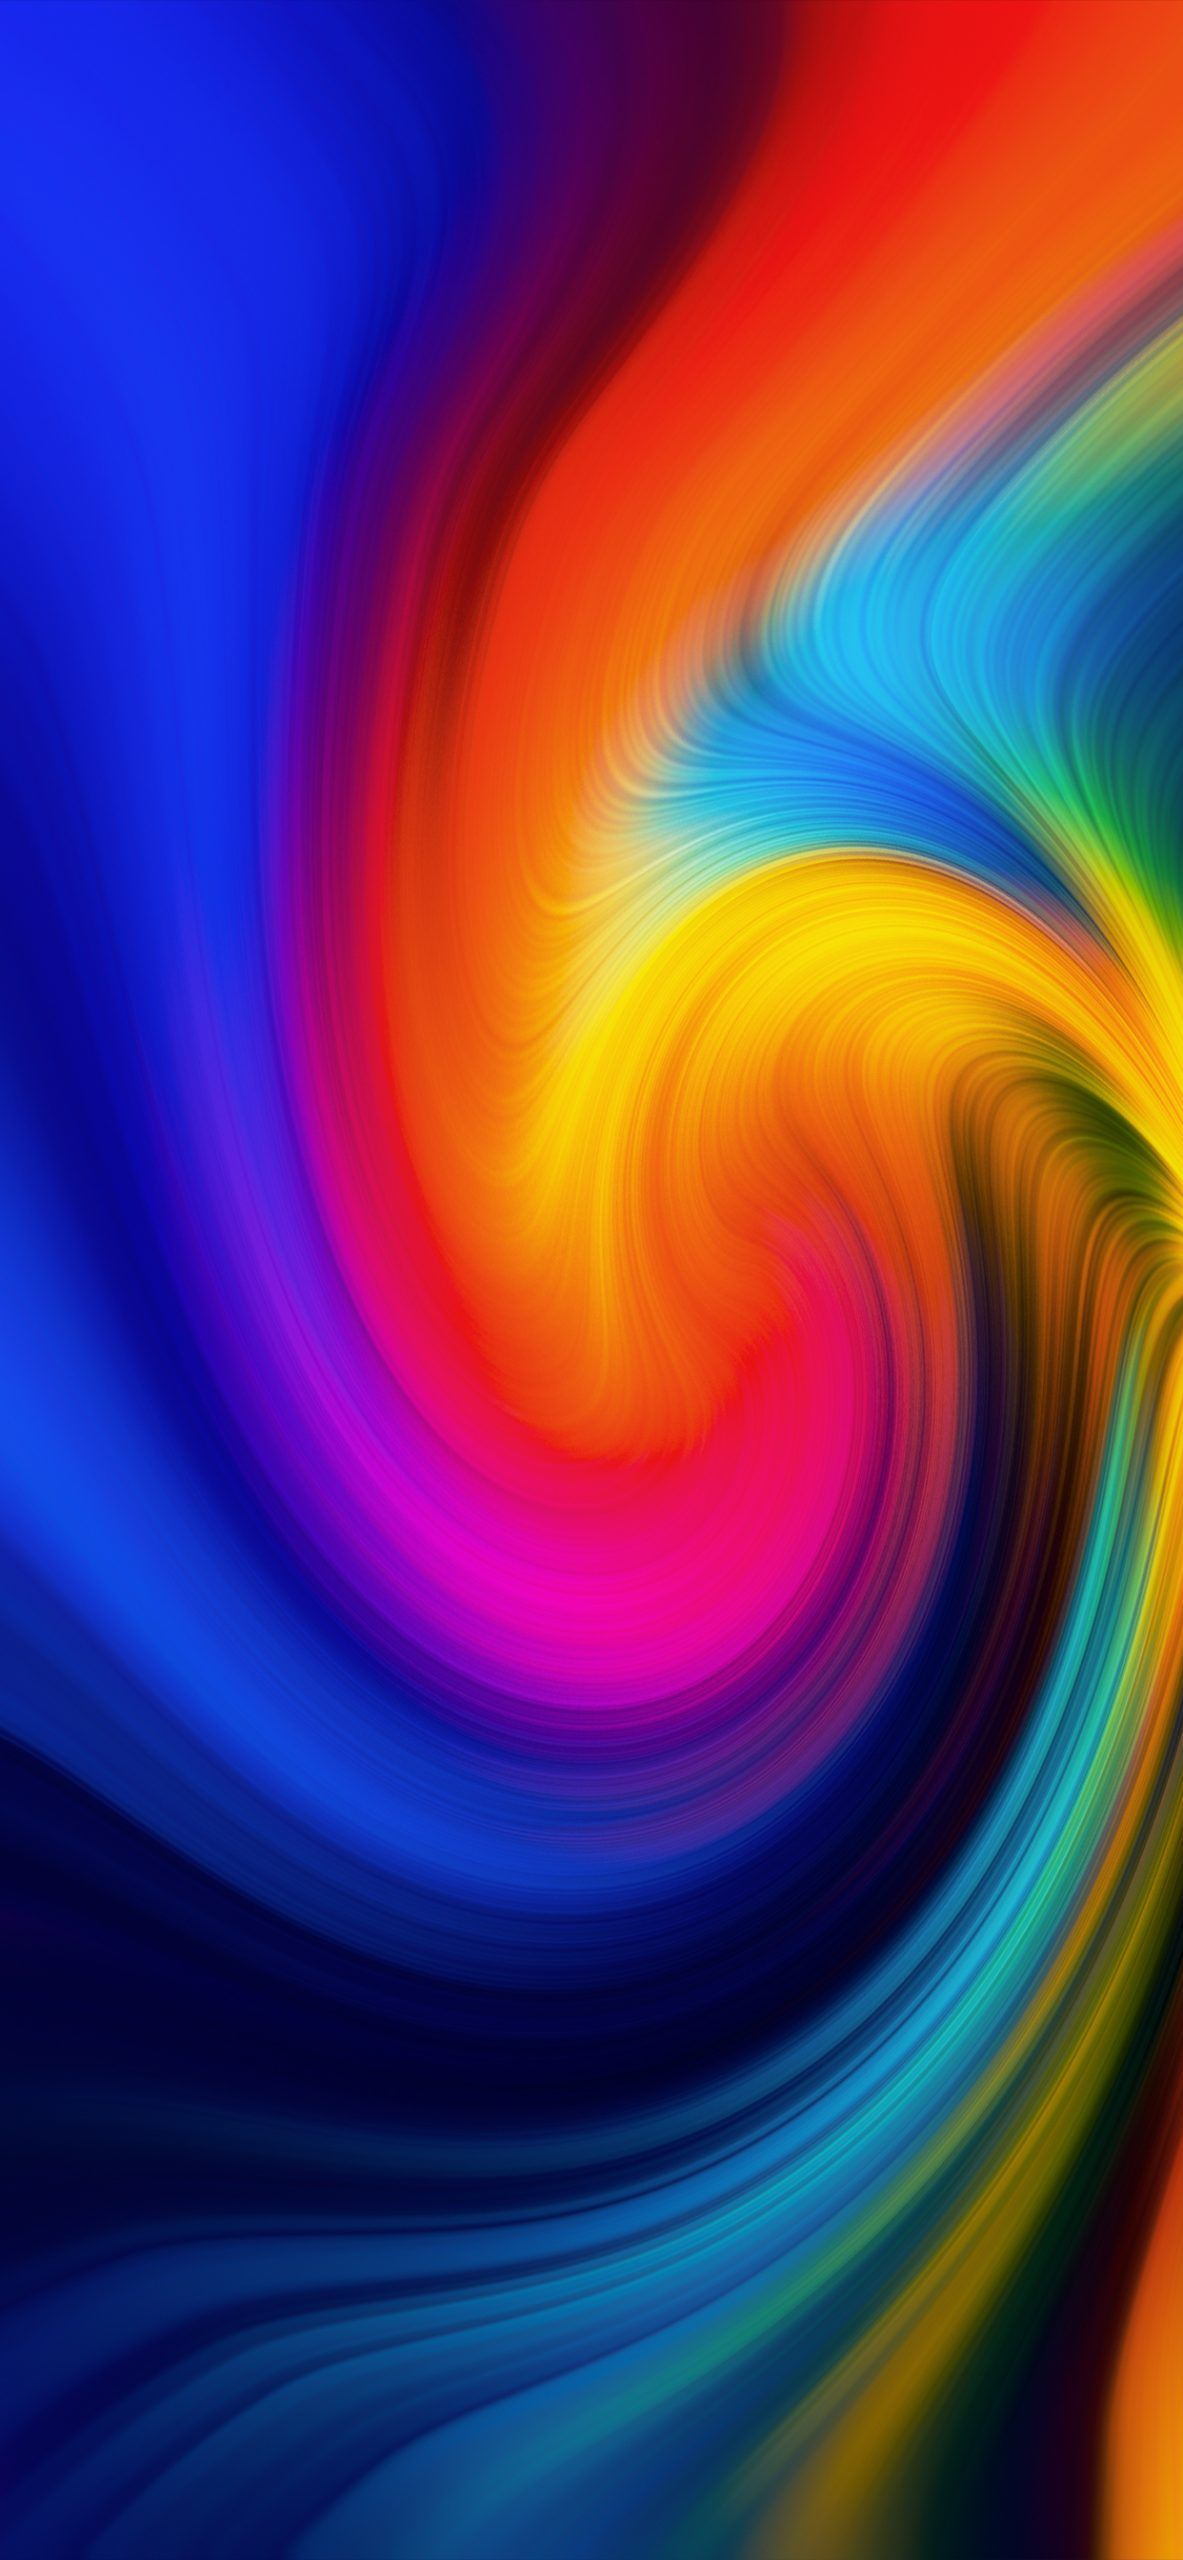 1183x2560 Swirly gradient by @Hk3ToN on Twitter | Abstract wallpaper backgrounds, Colorful wallpaper, Uhd wallpaper